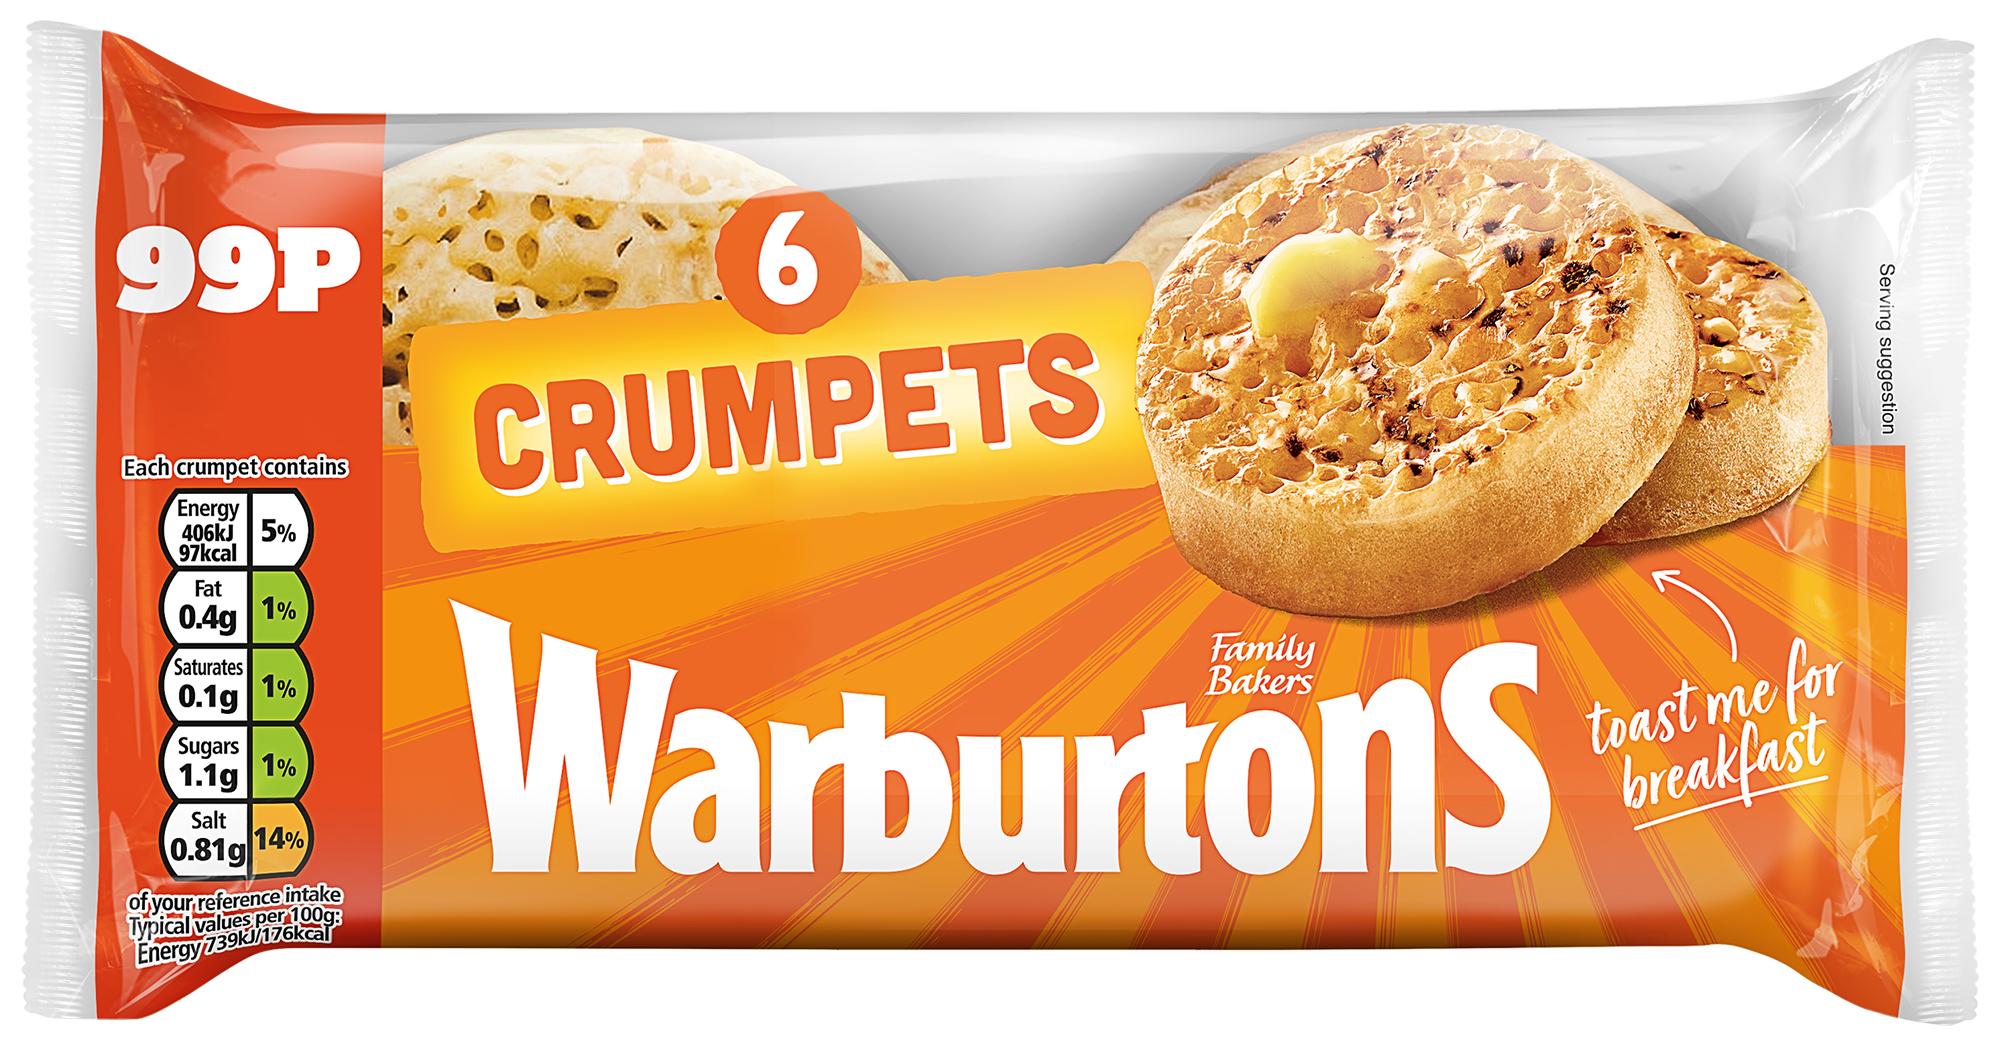 Warburtons launches PMP range for iconic product